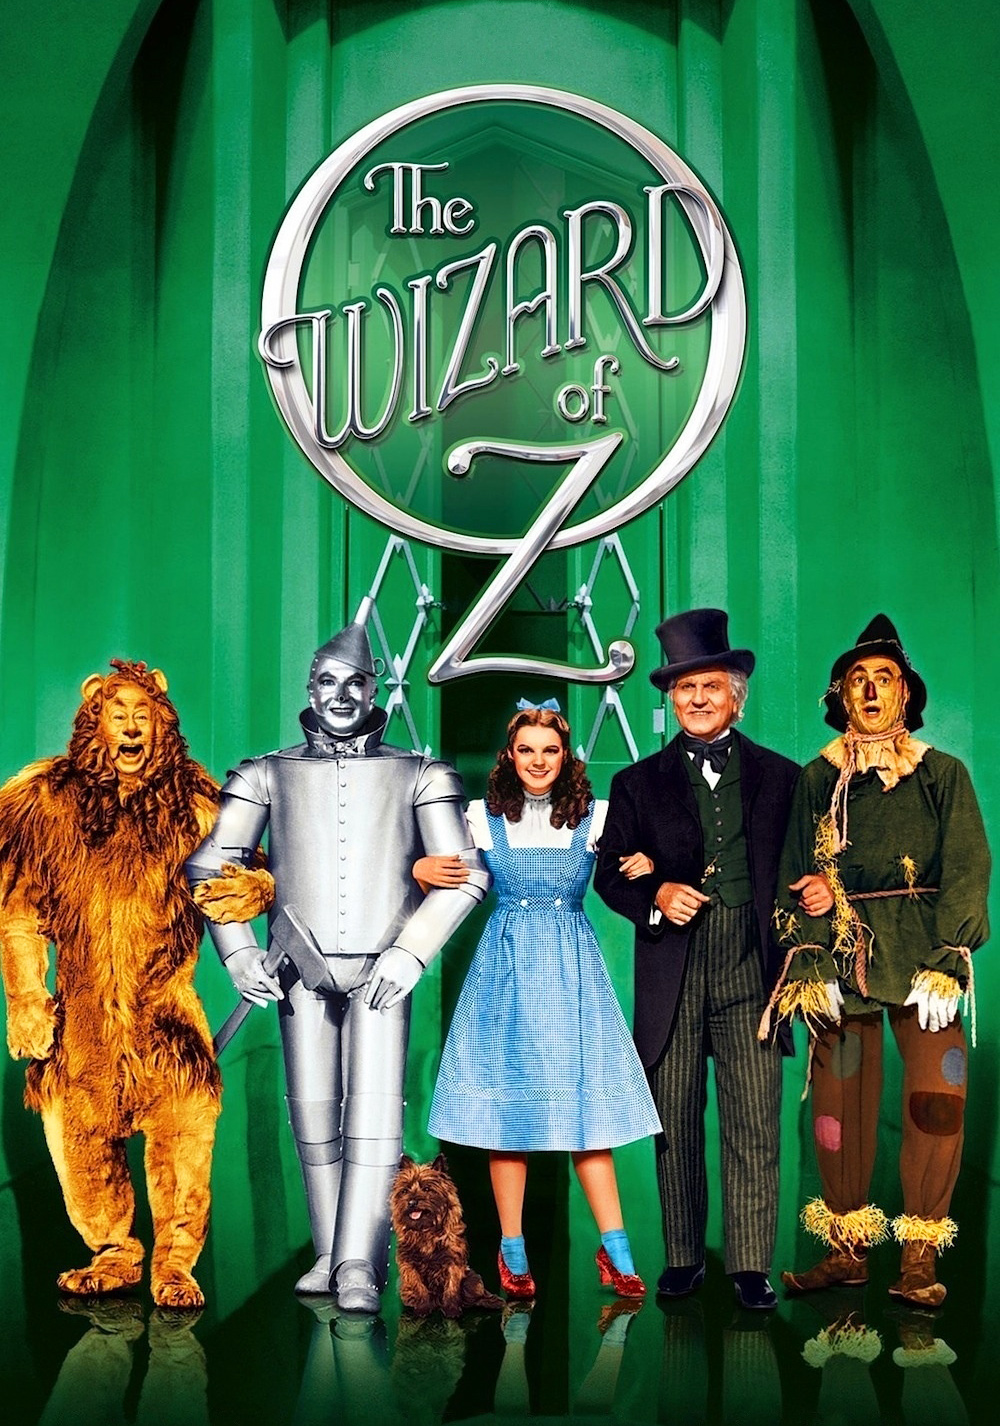 The Wizard Of Oz (1939) Art